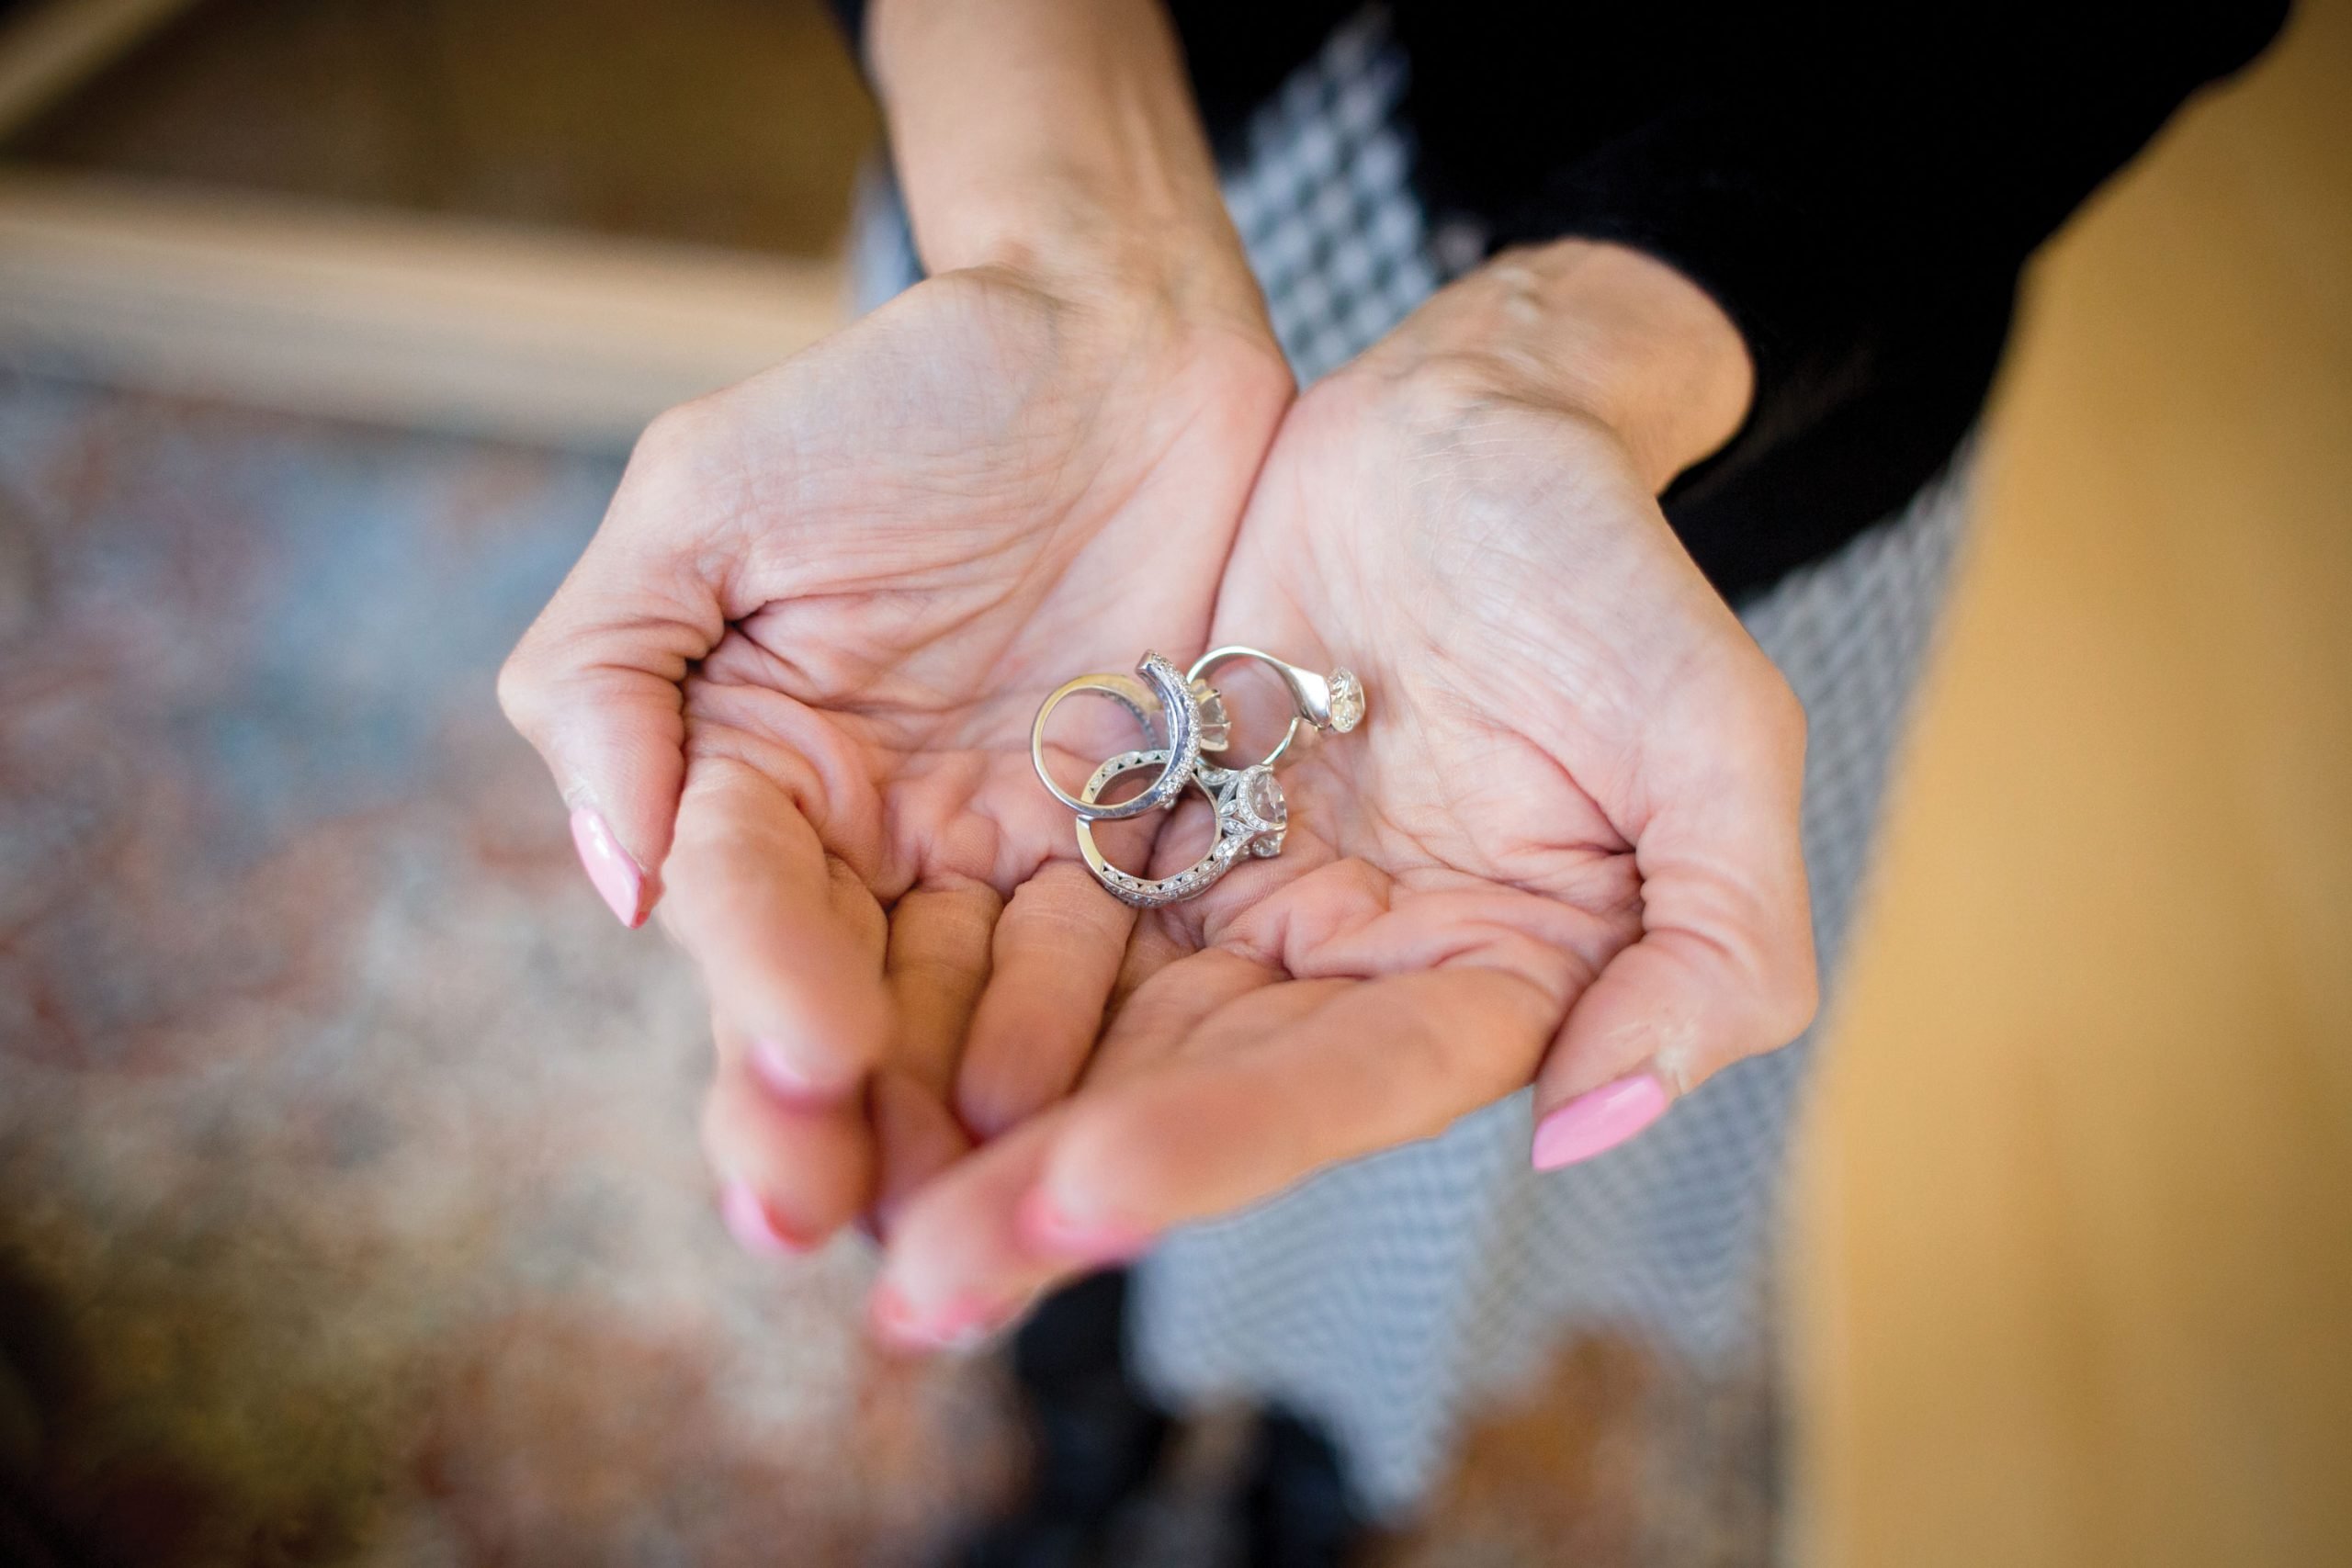 PURE helped save some of Nina's rings after a fire